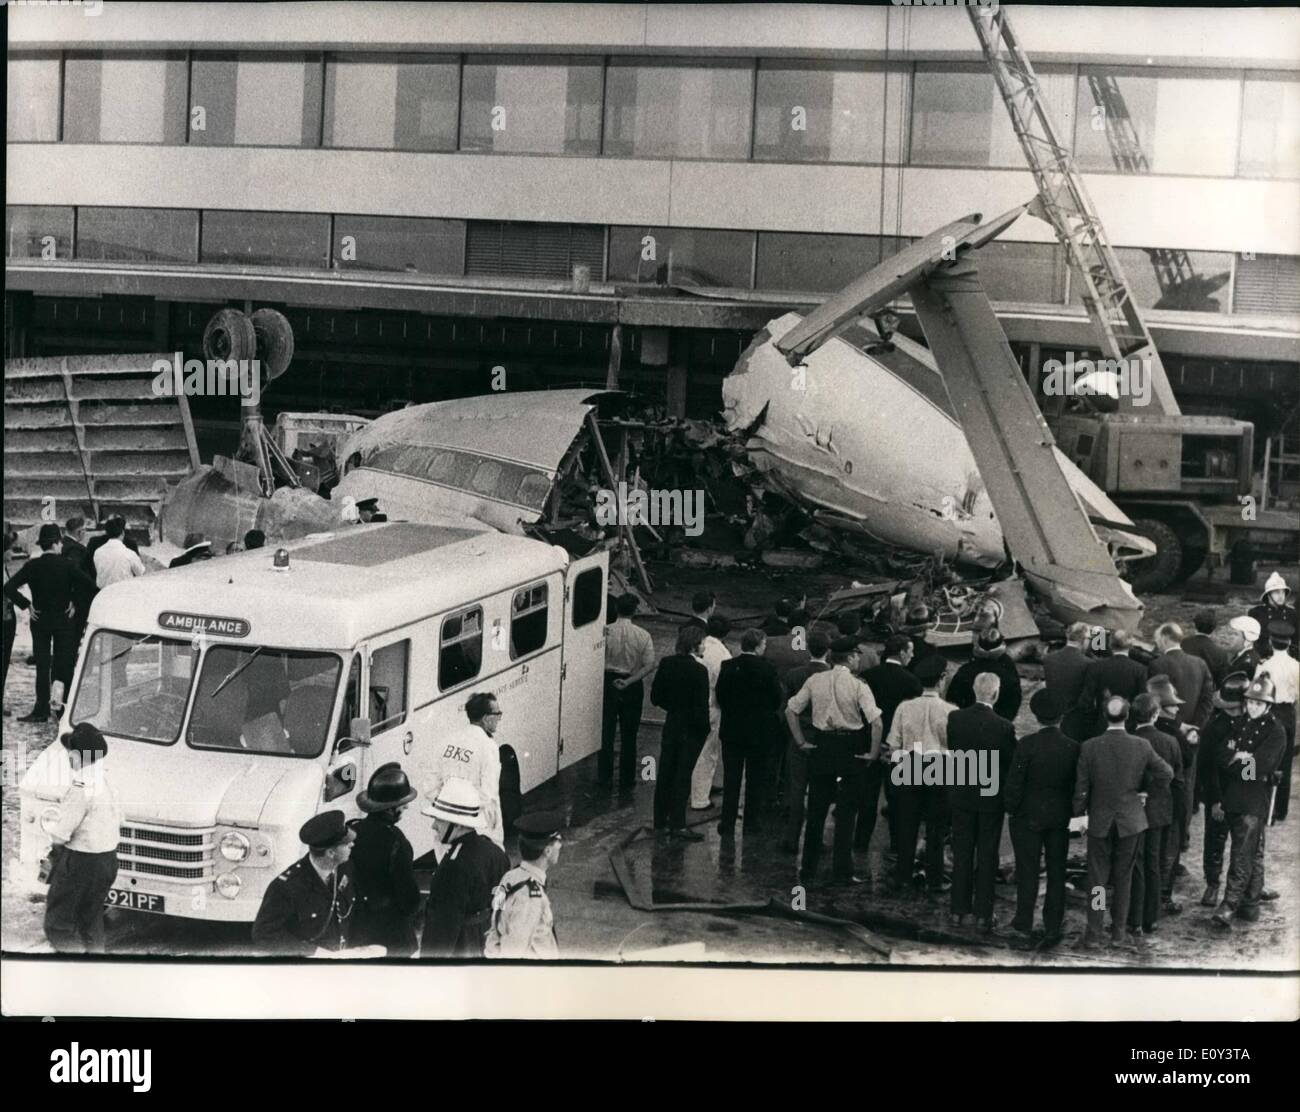 Jul. 07, 1968 - Six people die in air crash. Six people were killed and six injured as an Elizabeth freighter of B k s, the independent airline, crashed on landing at Heathrow Airport yesterday , struck three parked Bea airliners and damasked into the wall of a passenger building under construction. the crash plane was returning eight brood mares and foals from Dauville, France, to stud farms in the south of England, the plane's crew of three and three grooms on board died. All the horse were killed or had to be destroyed Stock Photo